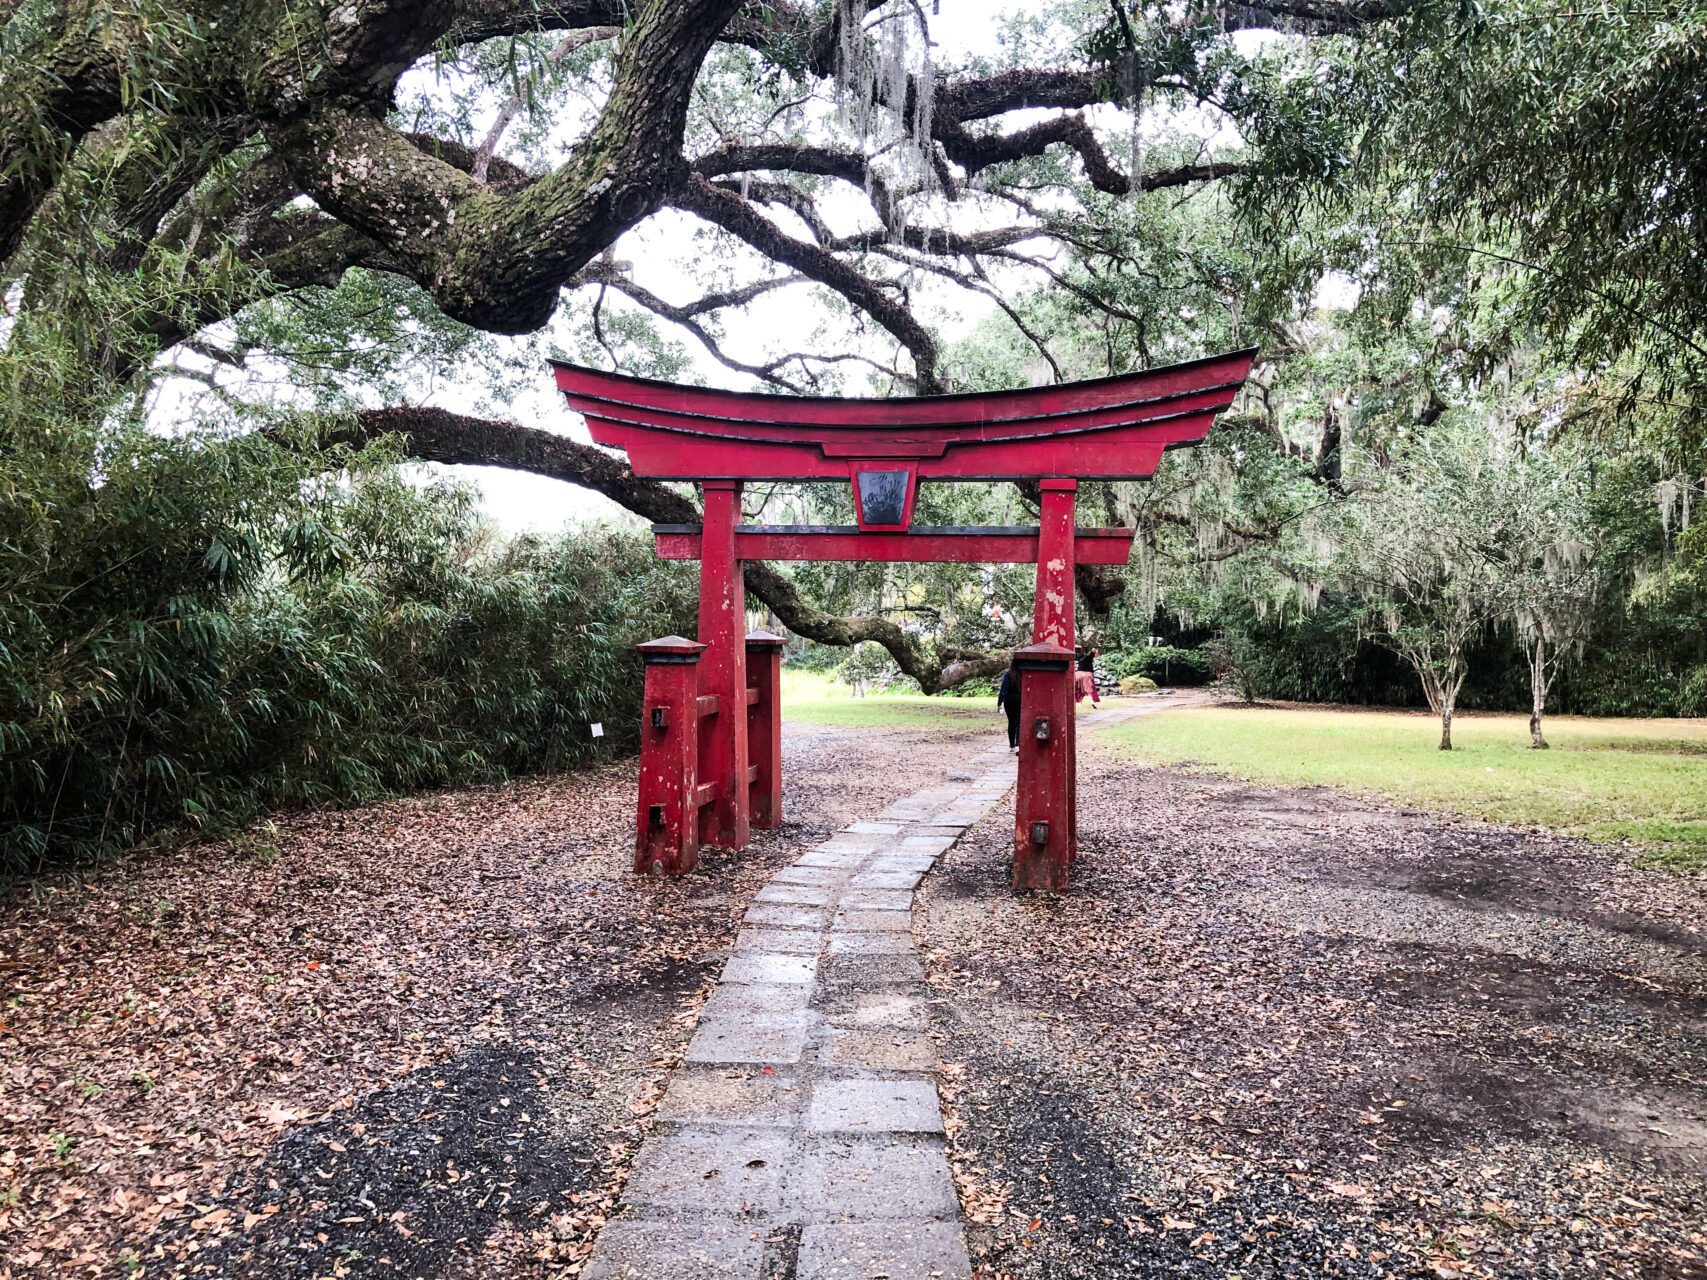 A red Japanese Torii in the Avery Island Jungle Garden.